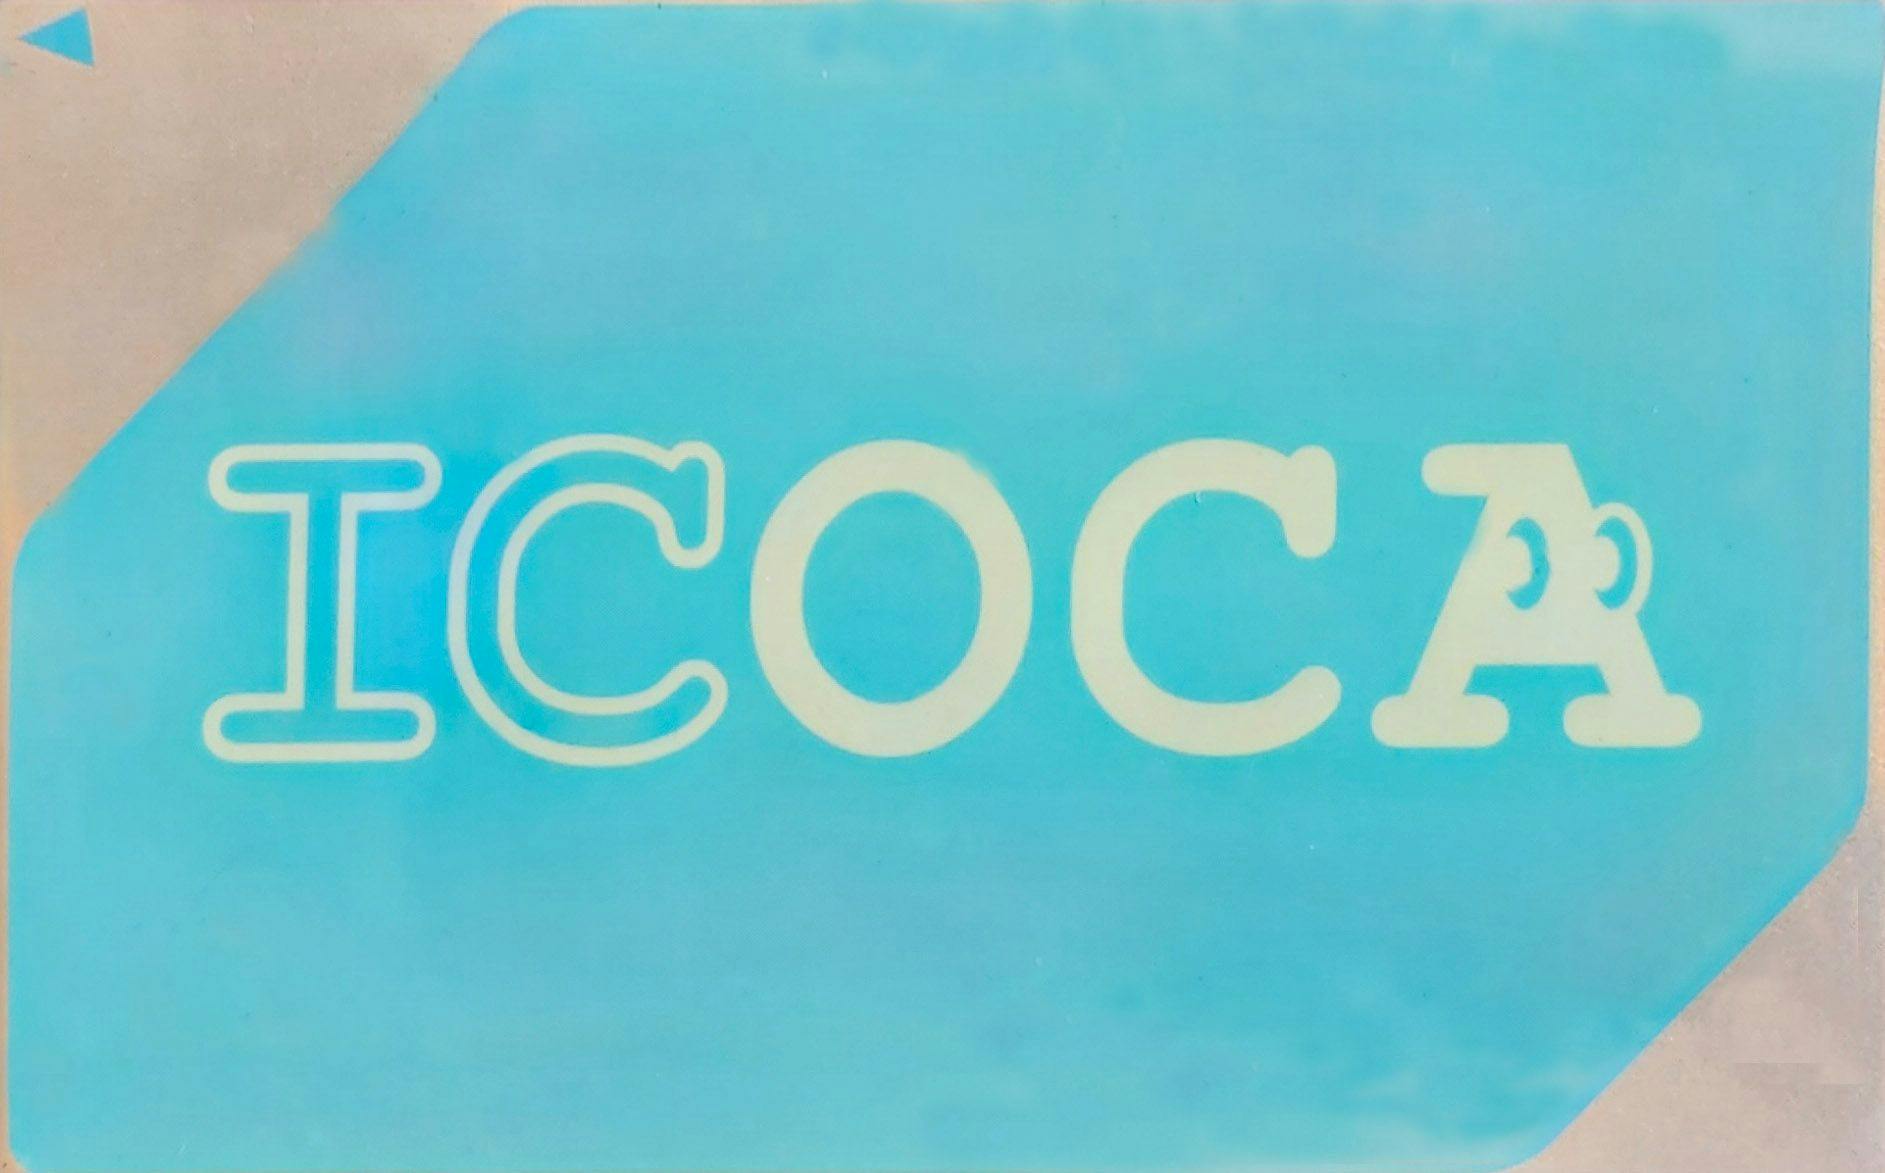 The ICOCA card, available in the western Japan region, known as the Kansai region.